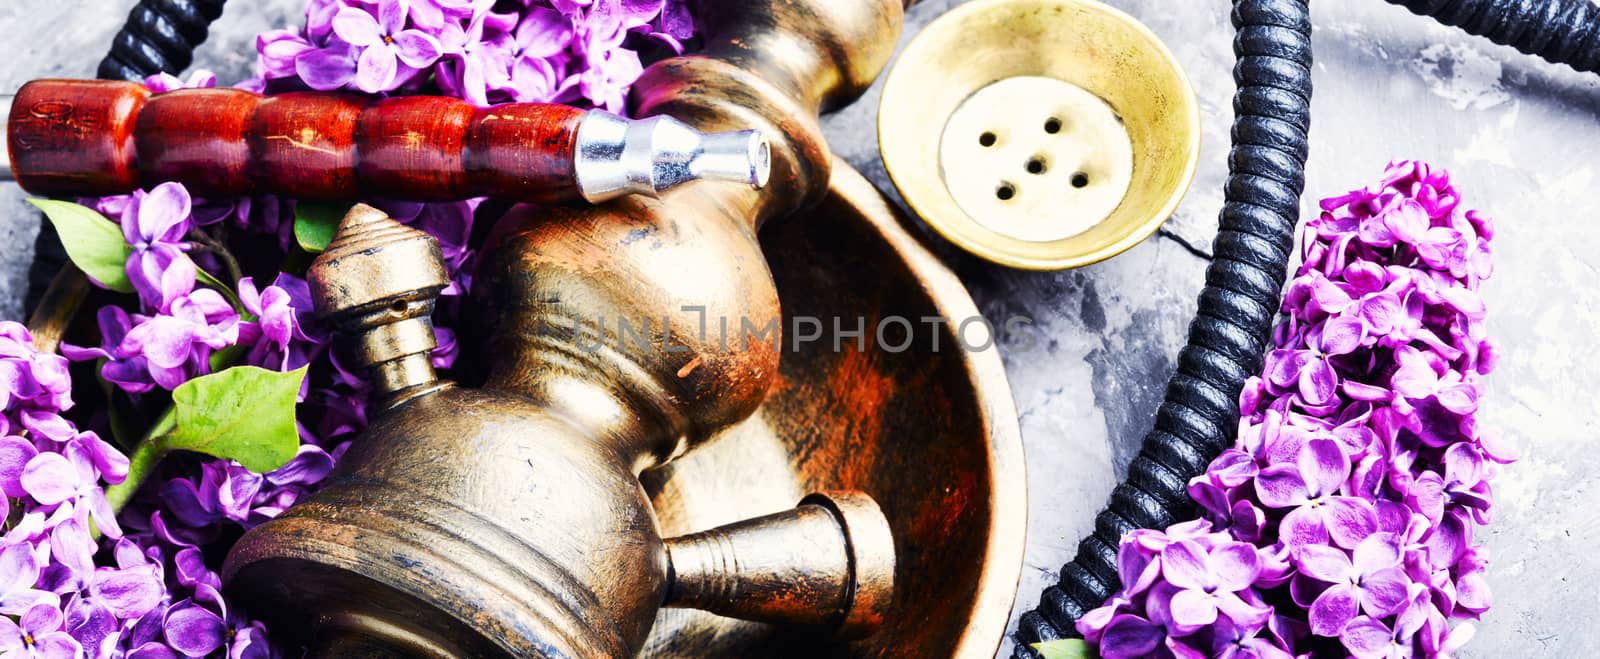 Asian tobacco hookah with floral aroma by LMykola